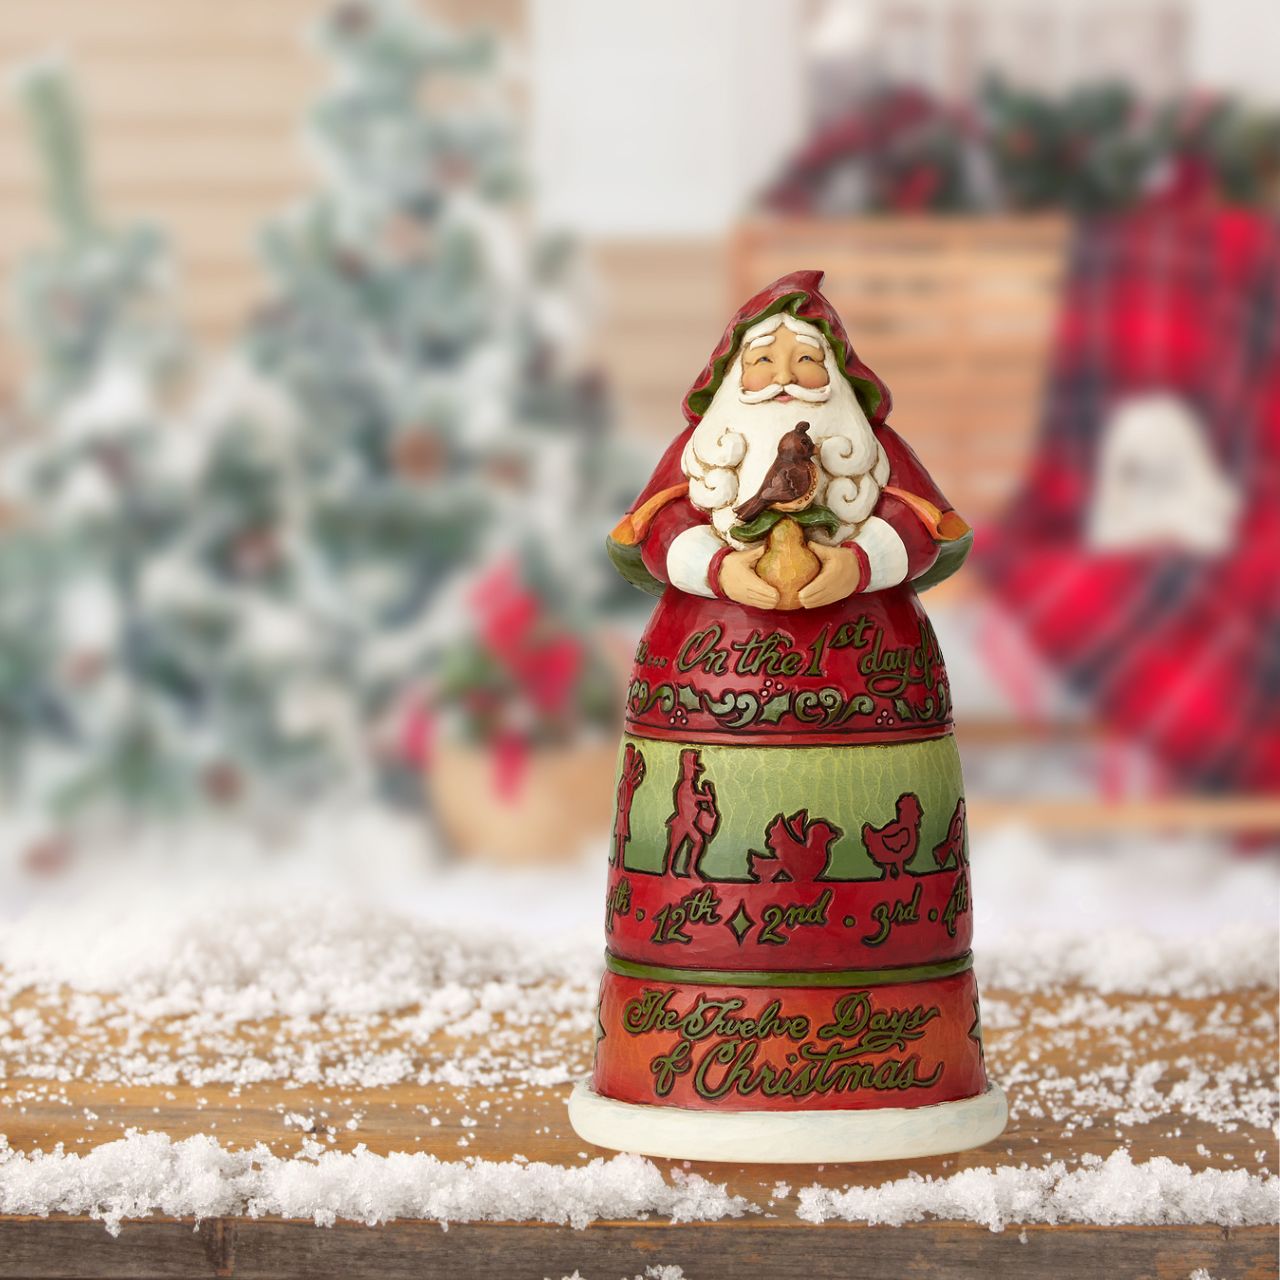 Jim Shore Heartwood Creek Offerings From The Heart  Heartwood Creek 12 Days of Christmas Santa is made of hand painted resin, wood style. Heartwood Creek Collection created by the American artist Jim Shore. 